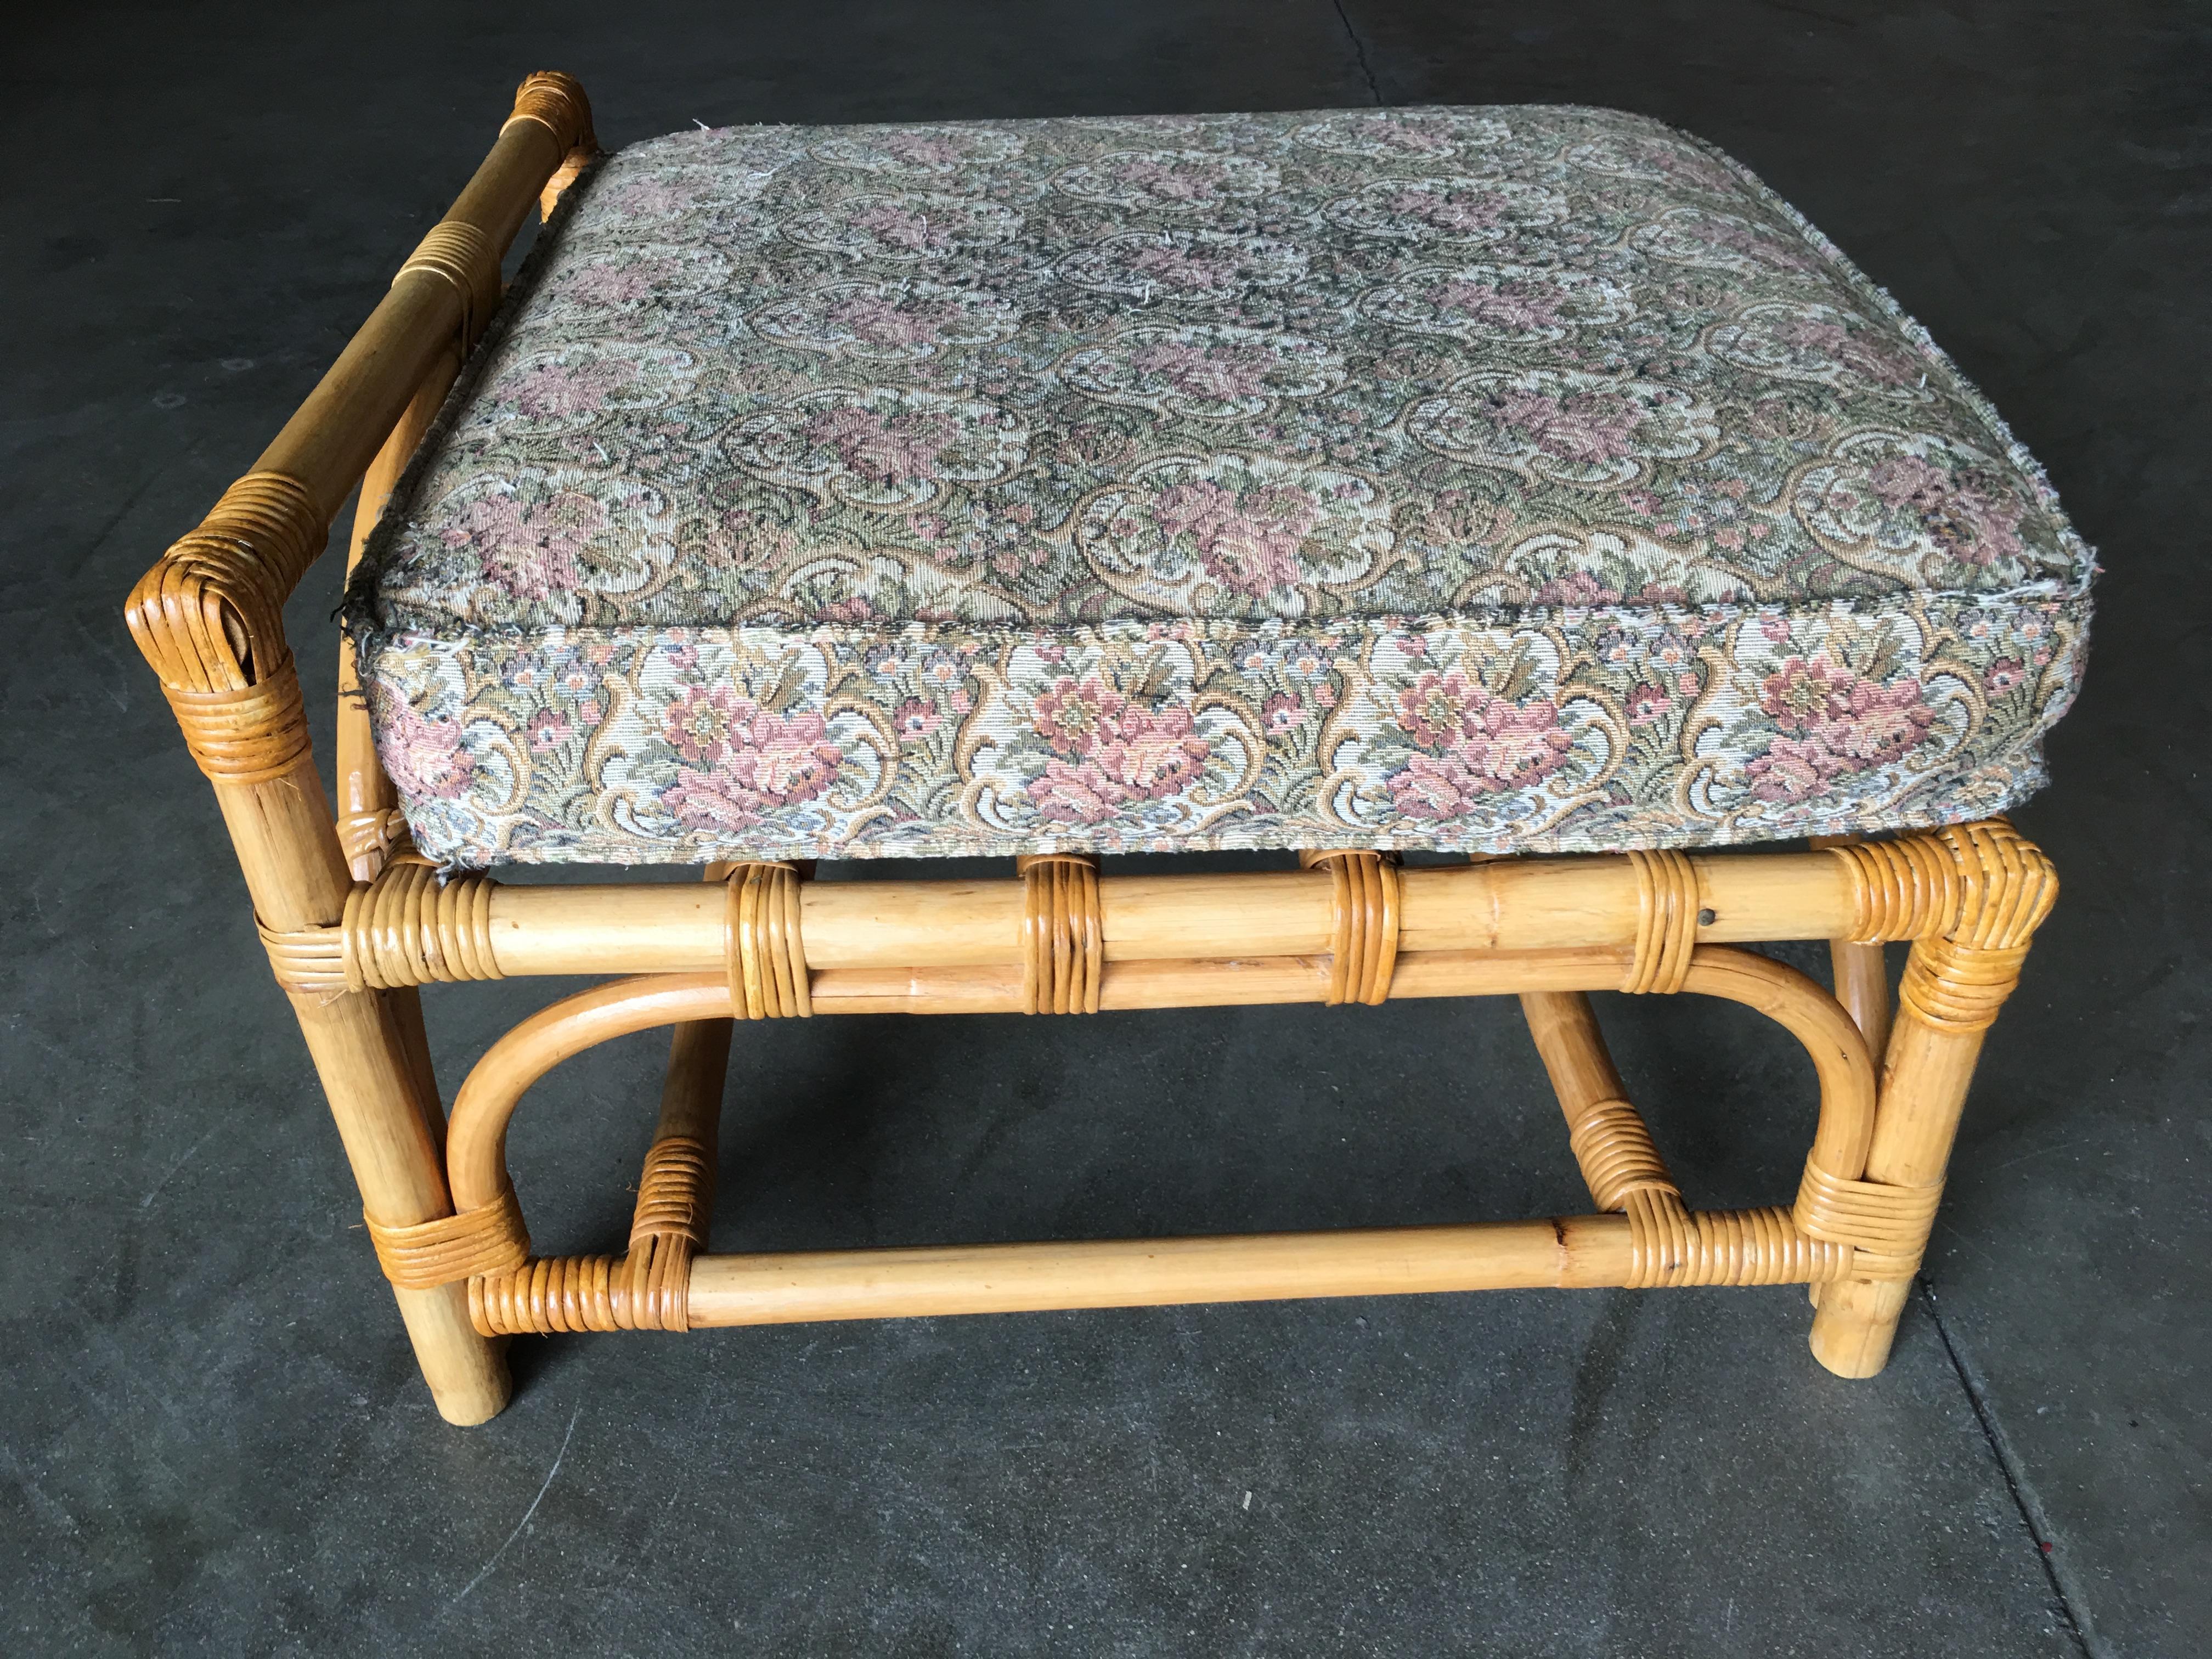 Fully restored single stand rattan triple-arched ottoman stool with a front handrail. The ottoman features fancy wicker wrappings through out.

Custom cushions C.O.M. (Customers Own Material) are included in the price. Simply supply the fabric and